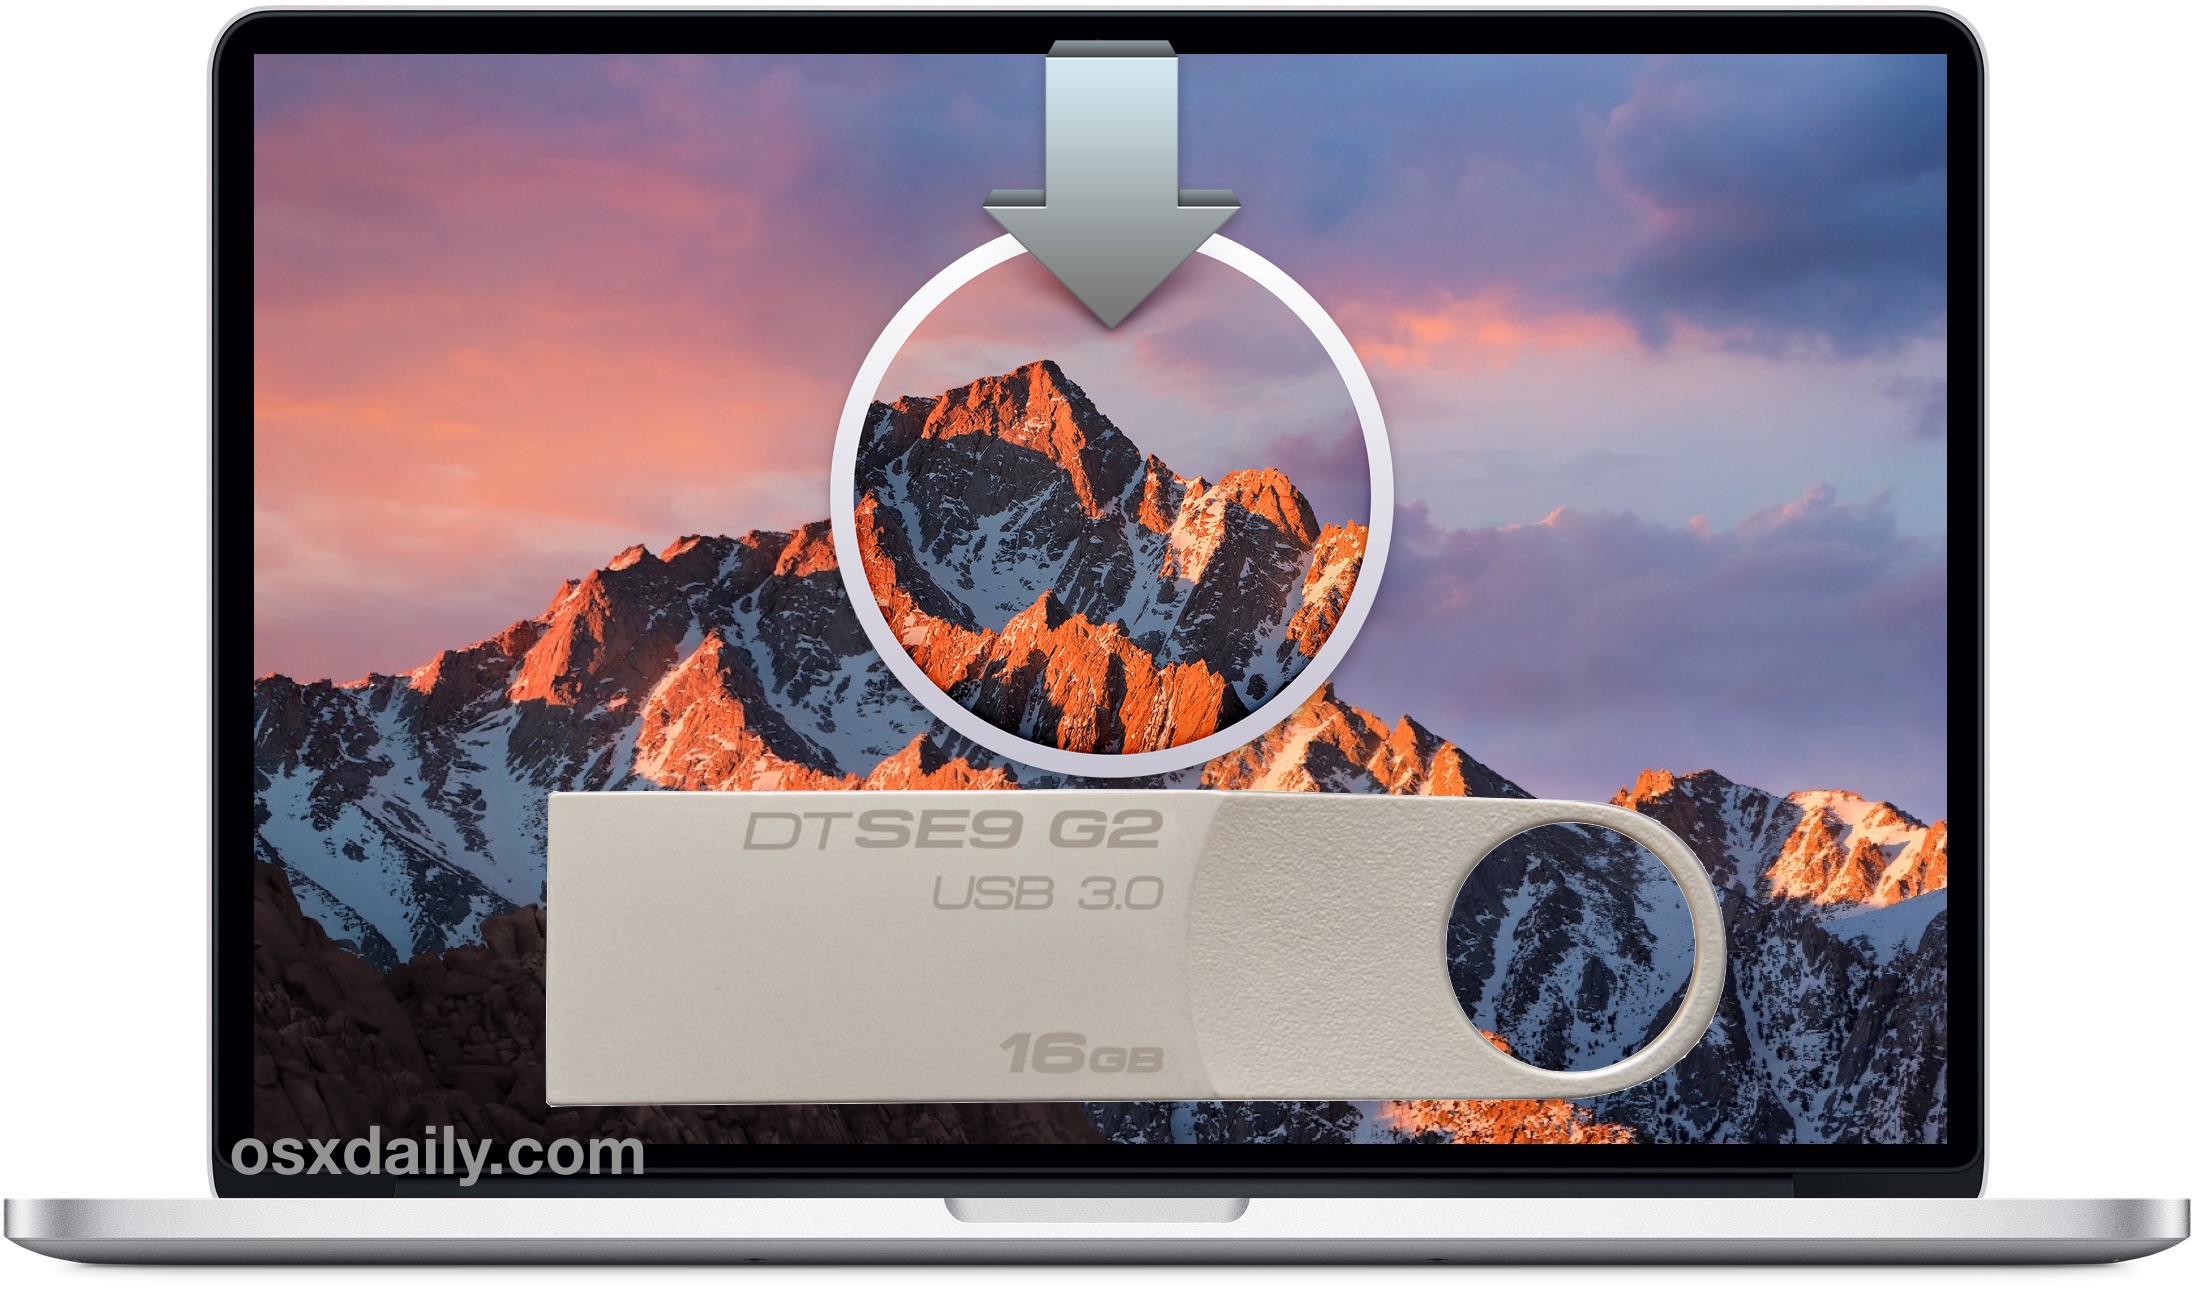 How To Create A Bootable Install Drive For Macos Sierra